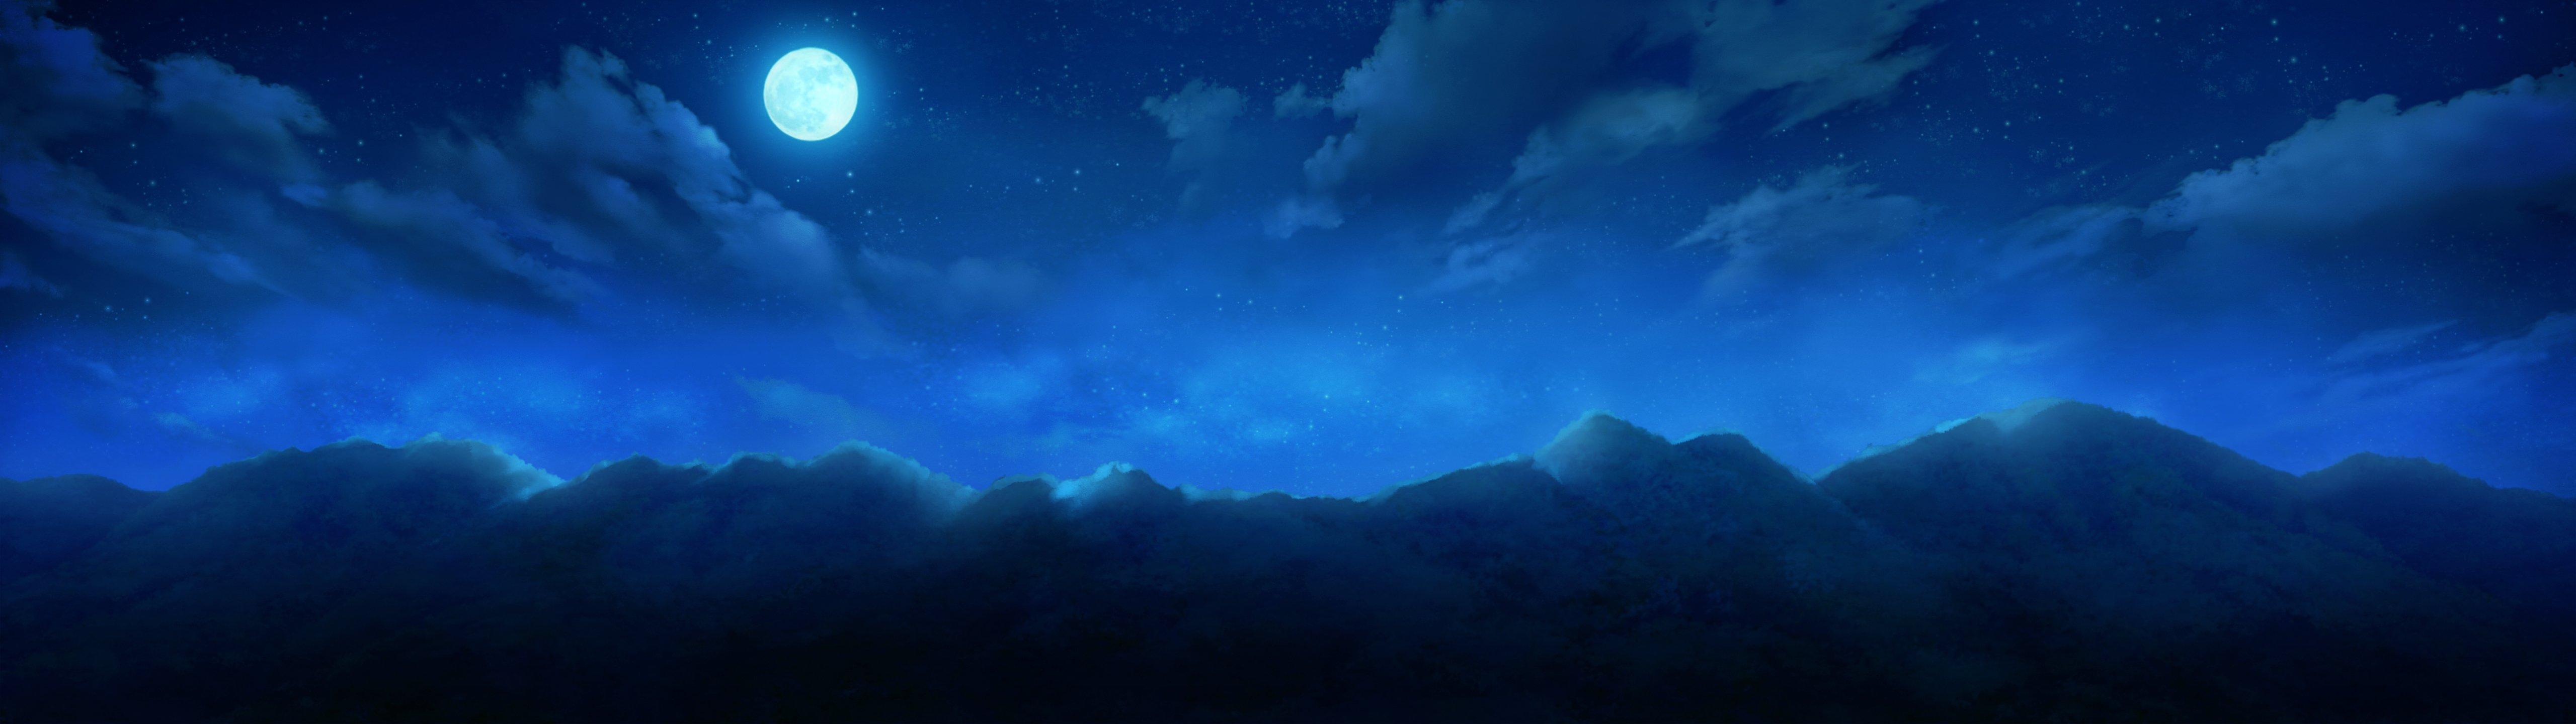 Anime scenery wallpaper of a full moon night with a mountain range - 5120x1440